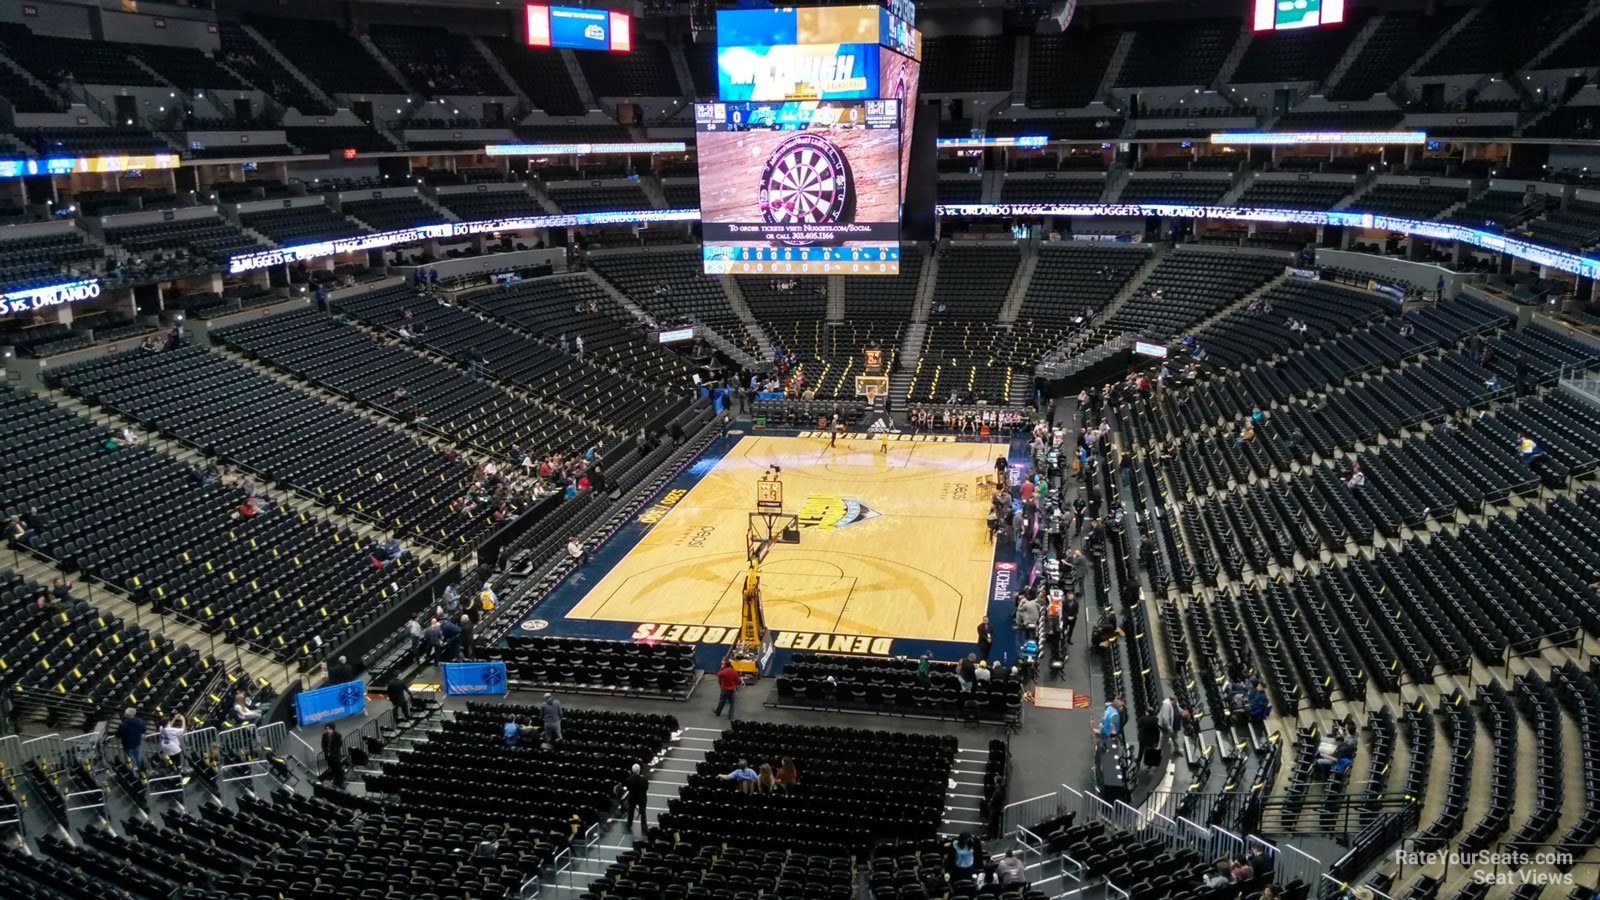 section 319, row 1 seat view  for basketball - ball arena